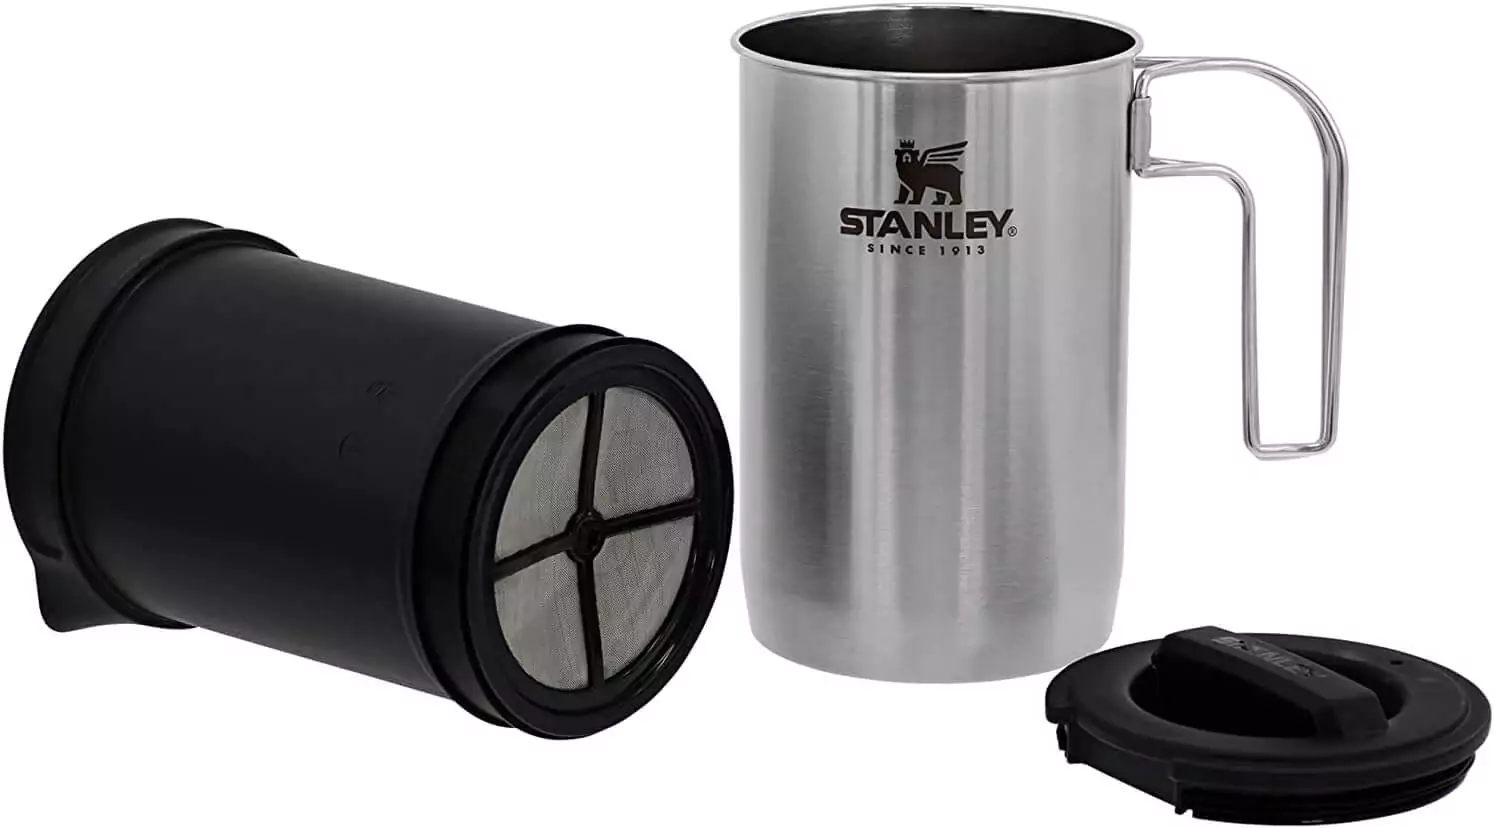 Stanely all in one french press coffee maker 3 pieces